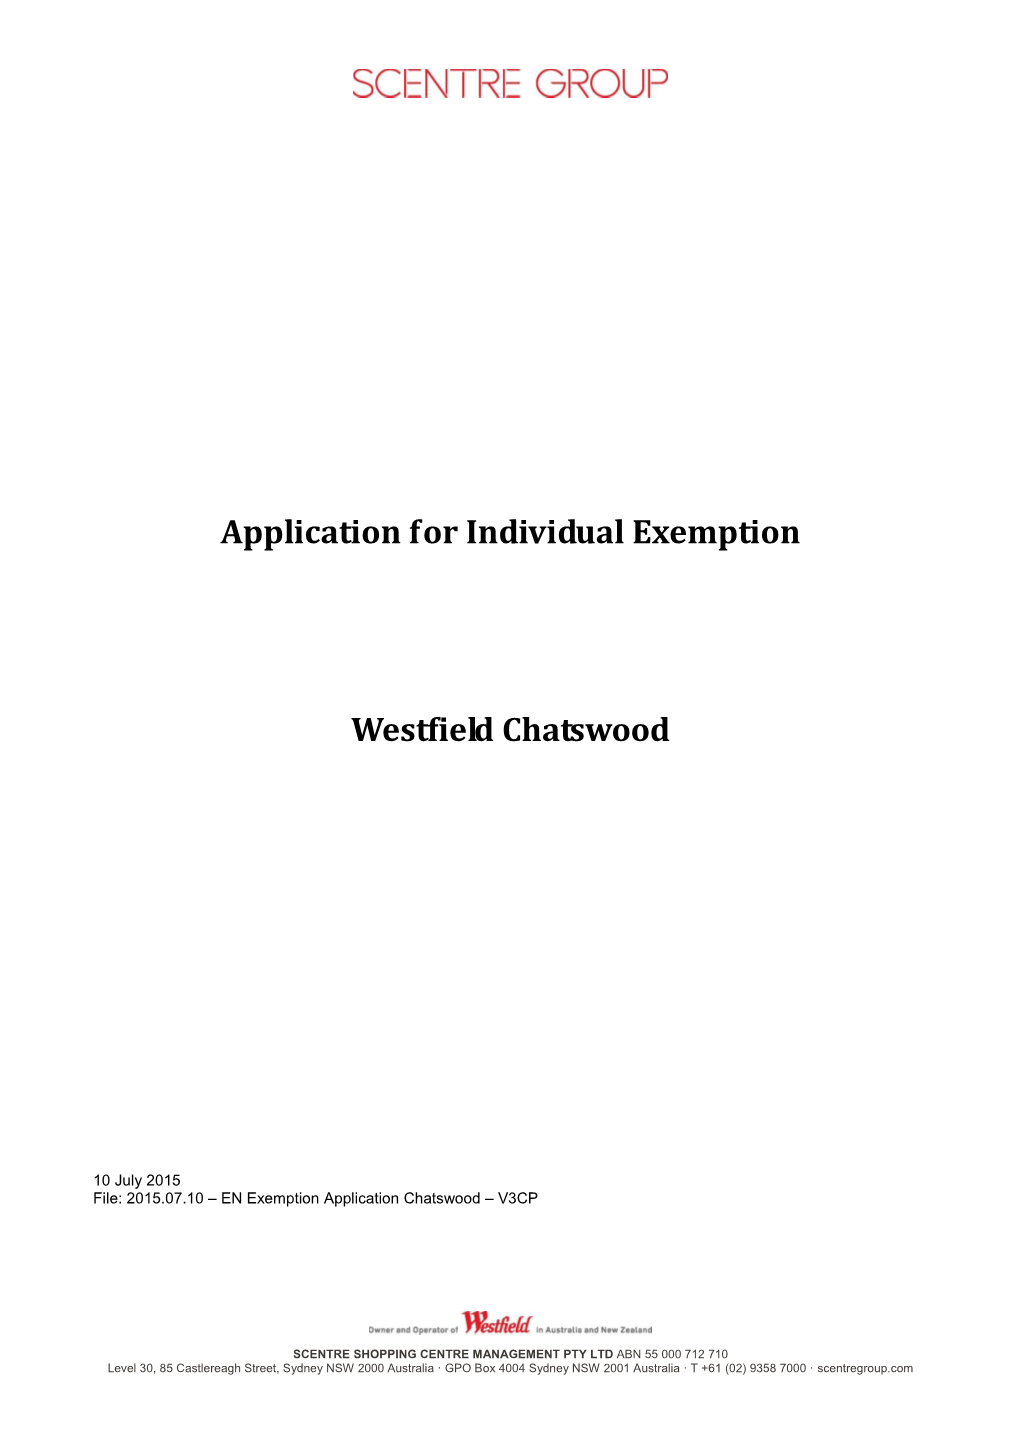 (Westfield Chatswood) Application for Individual Exemption